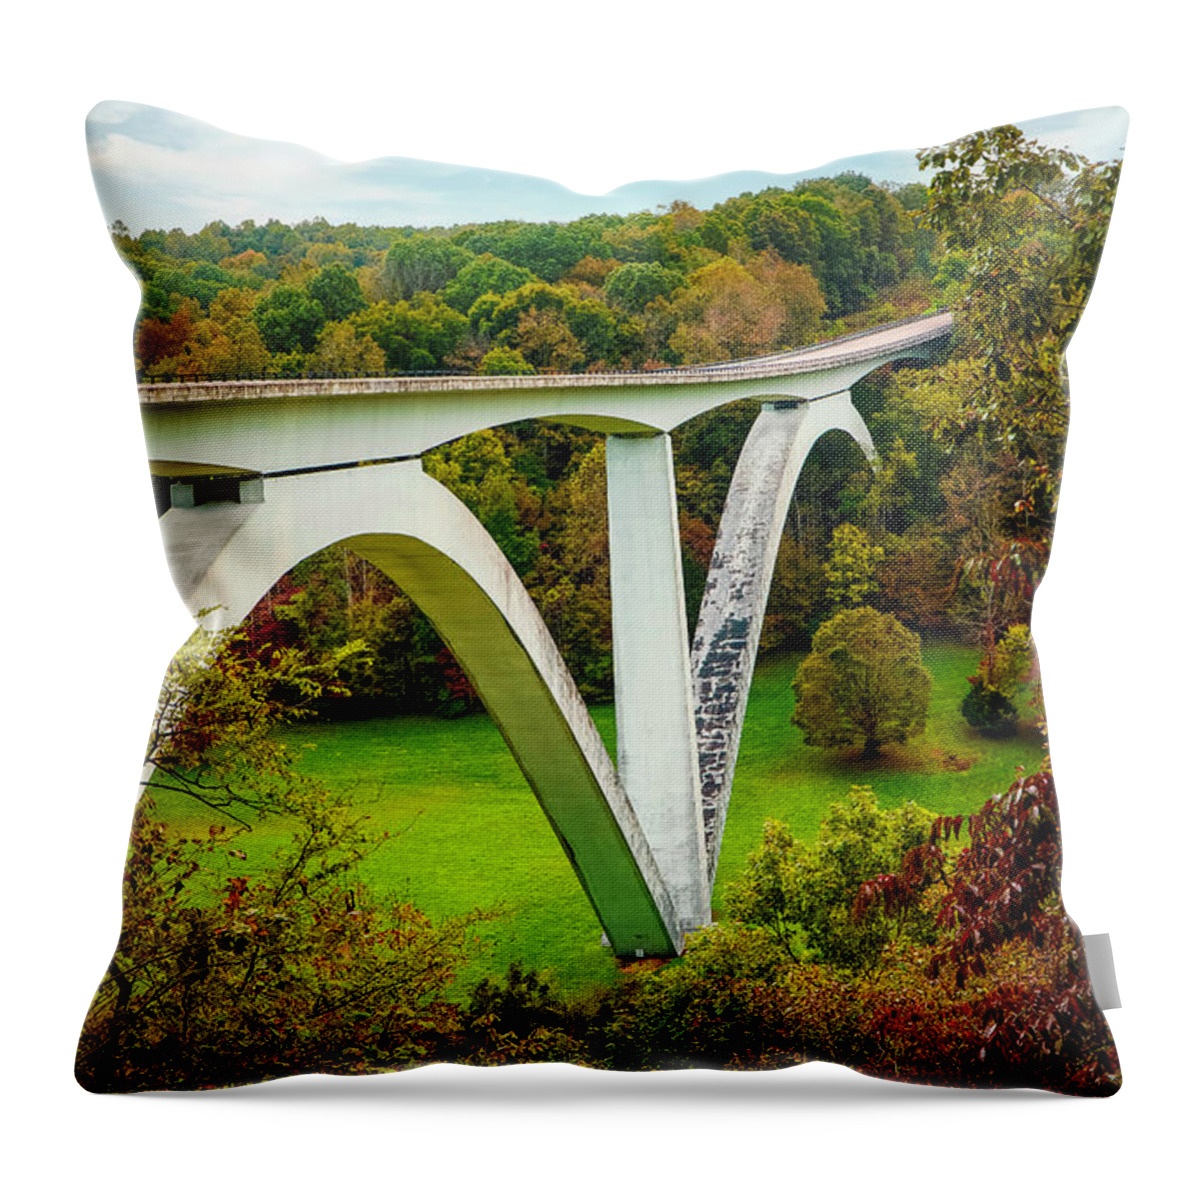 Double Arch Bridge Throw Pillow featuring the mixed media Double Arch Bridge- Photo by Linda Woods by Linda Woods